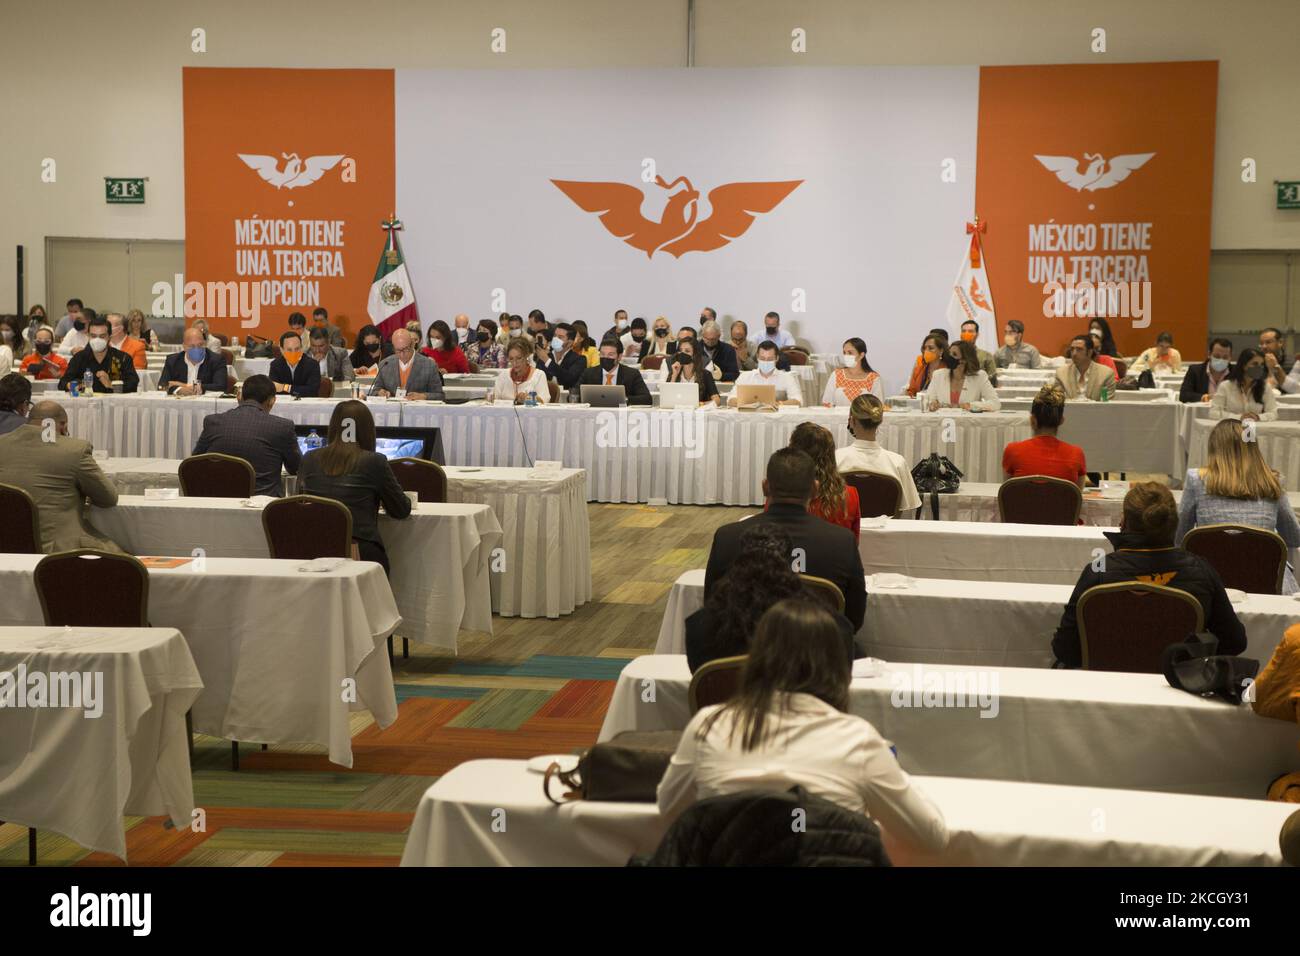 The national leadership of the Citizen Movement party, at a press conference, provided a report on the results obtained in the elections of June 6, also affirmed that their party endorsed in the Chamber of Deputies more than half of the presidential initiatives to coincide with their positions and with the good of Mexico. On July 5, 2021 in Mexico City, Mexico.(Photo by Cristian Leyva/NurPhoto) Stock Photo